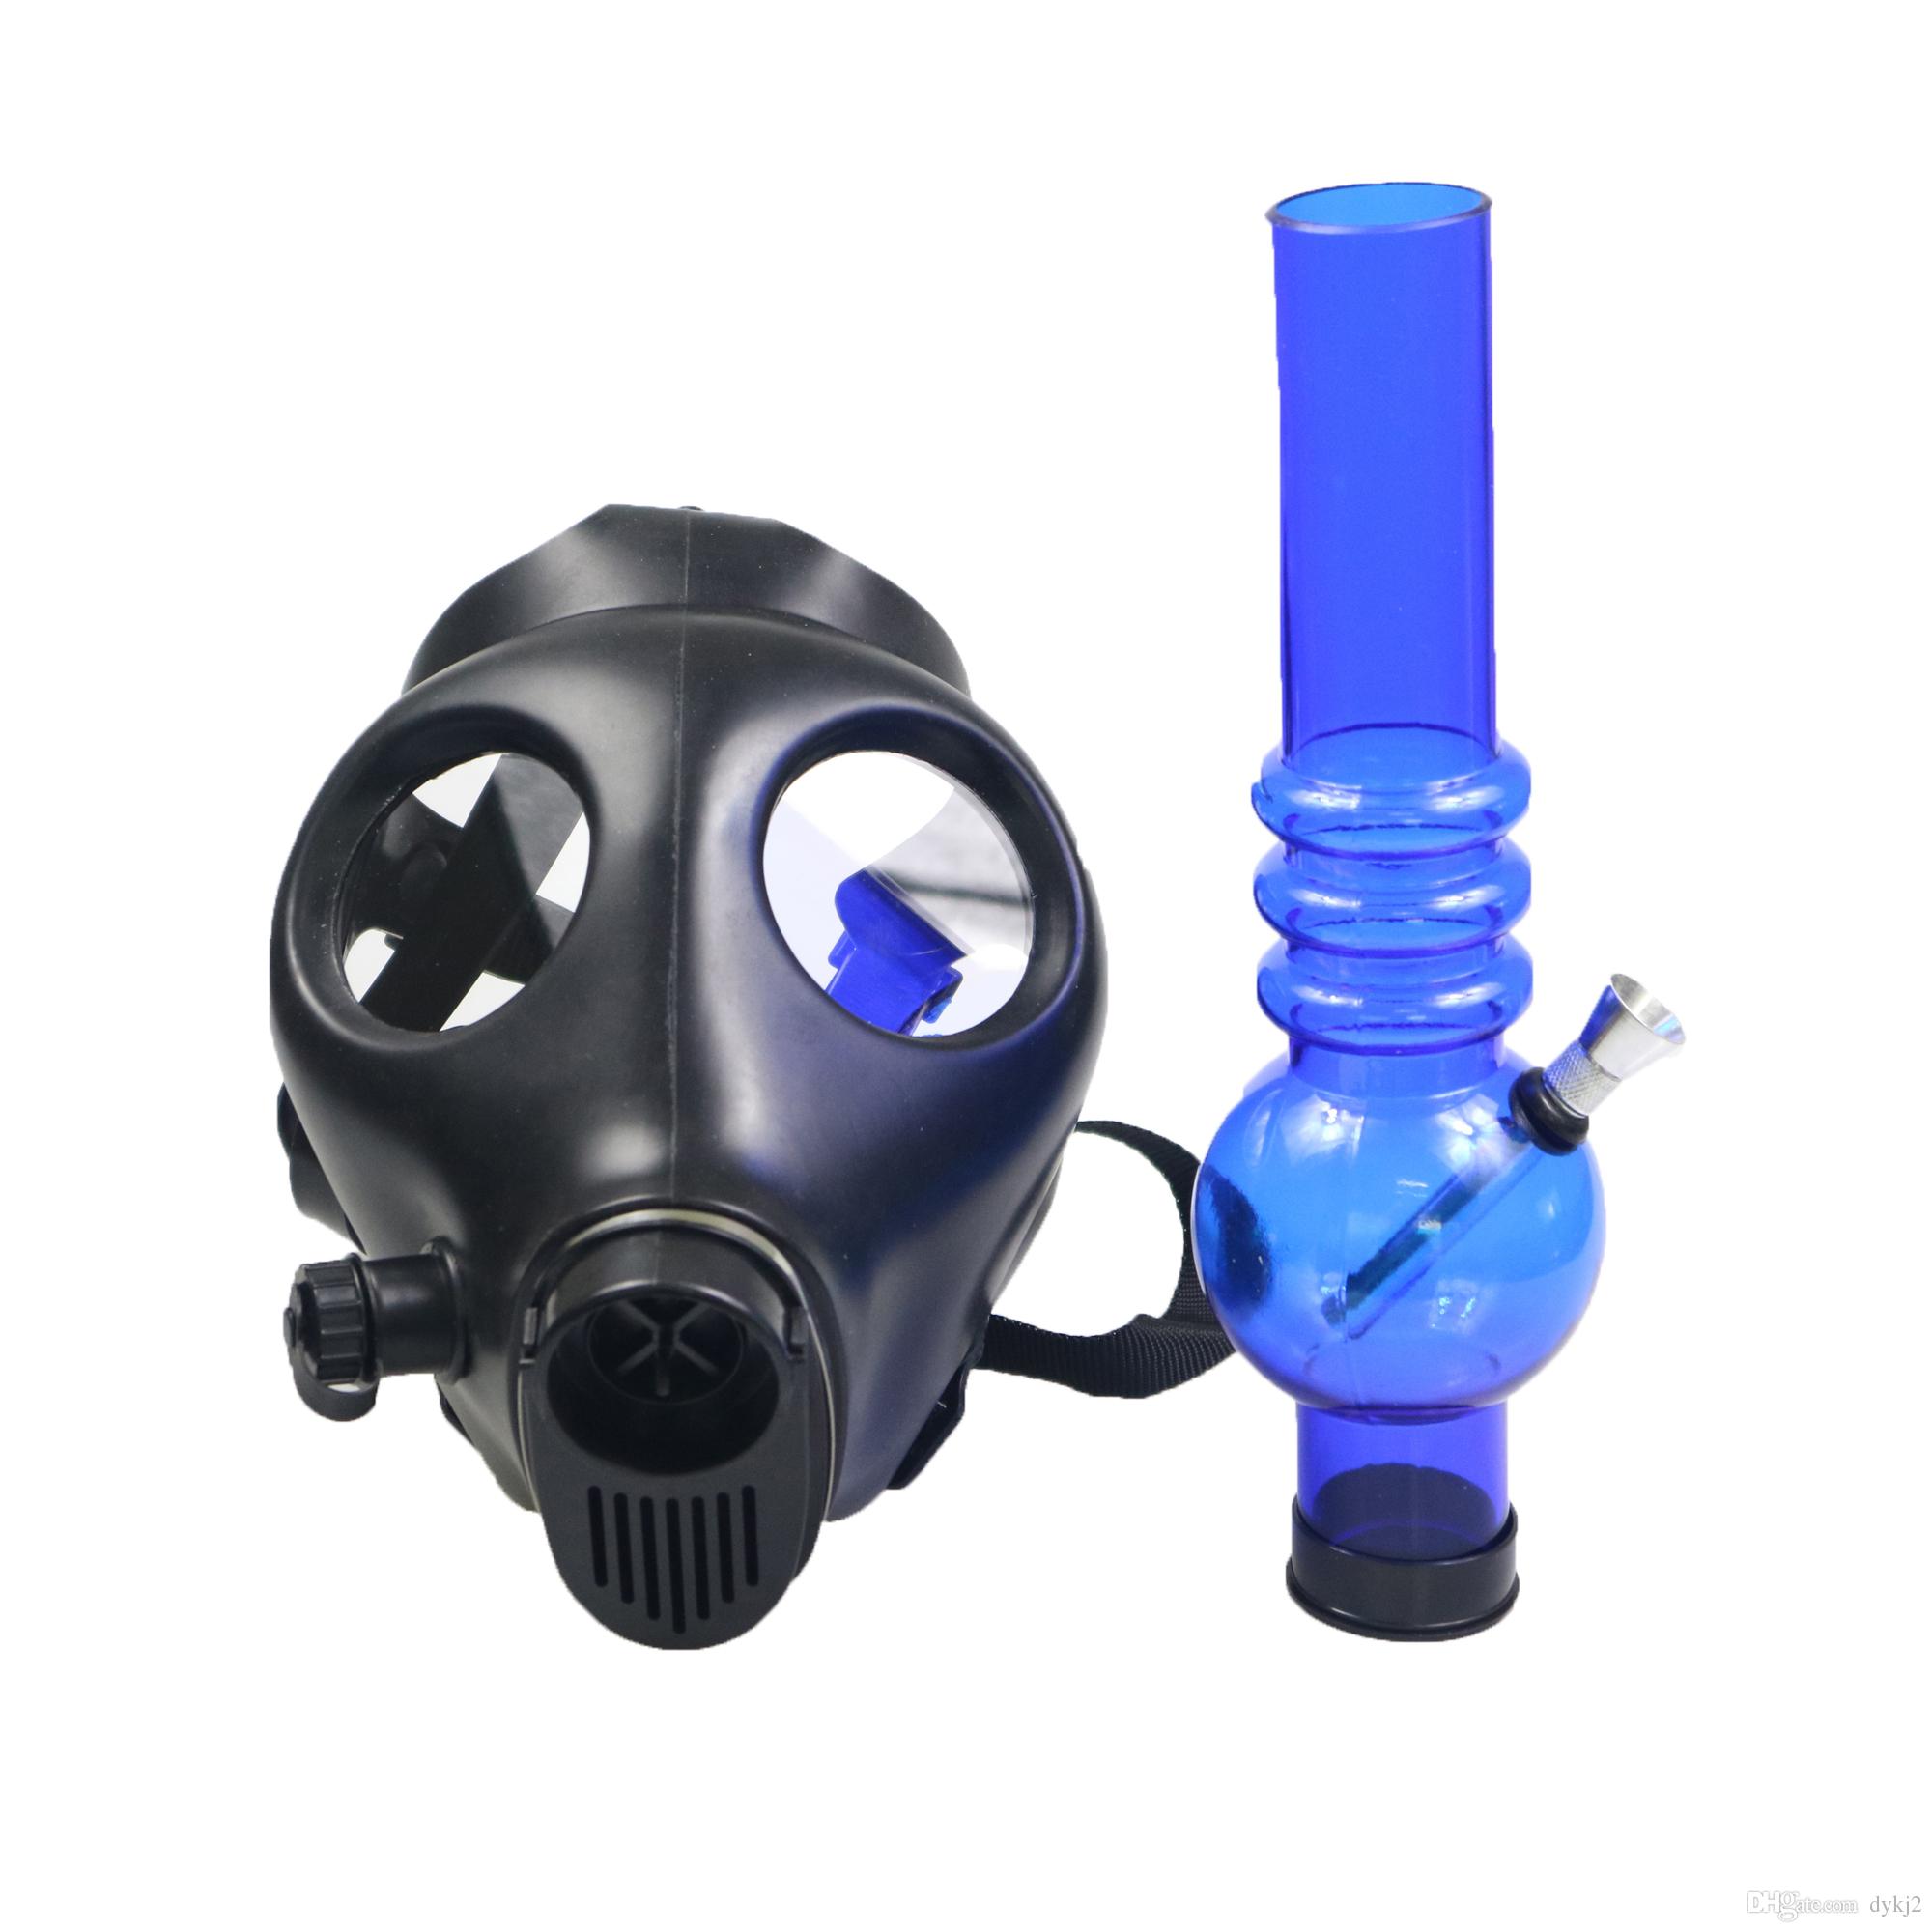 gas mask bongs are nad